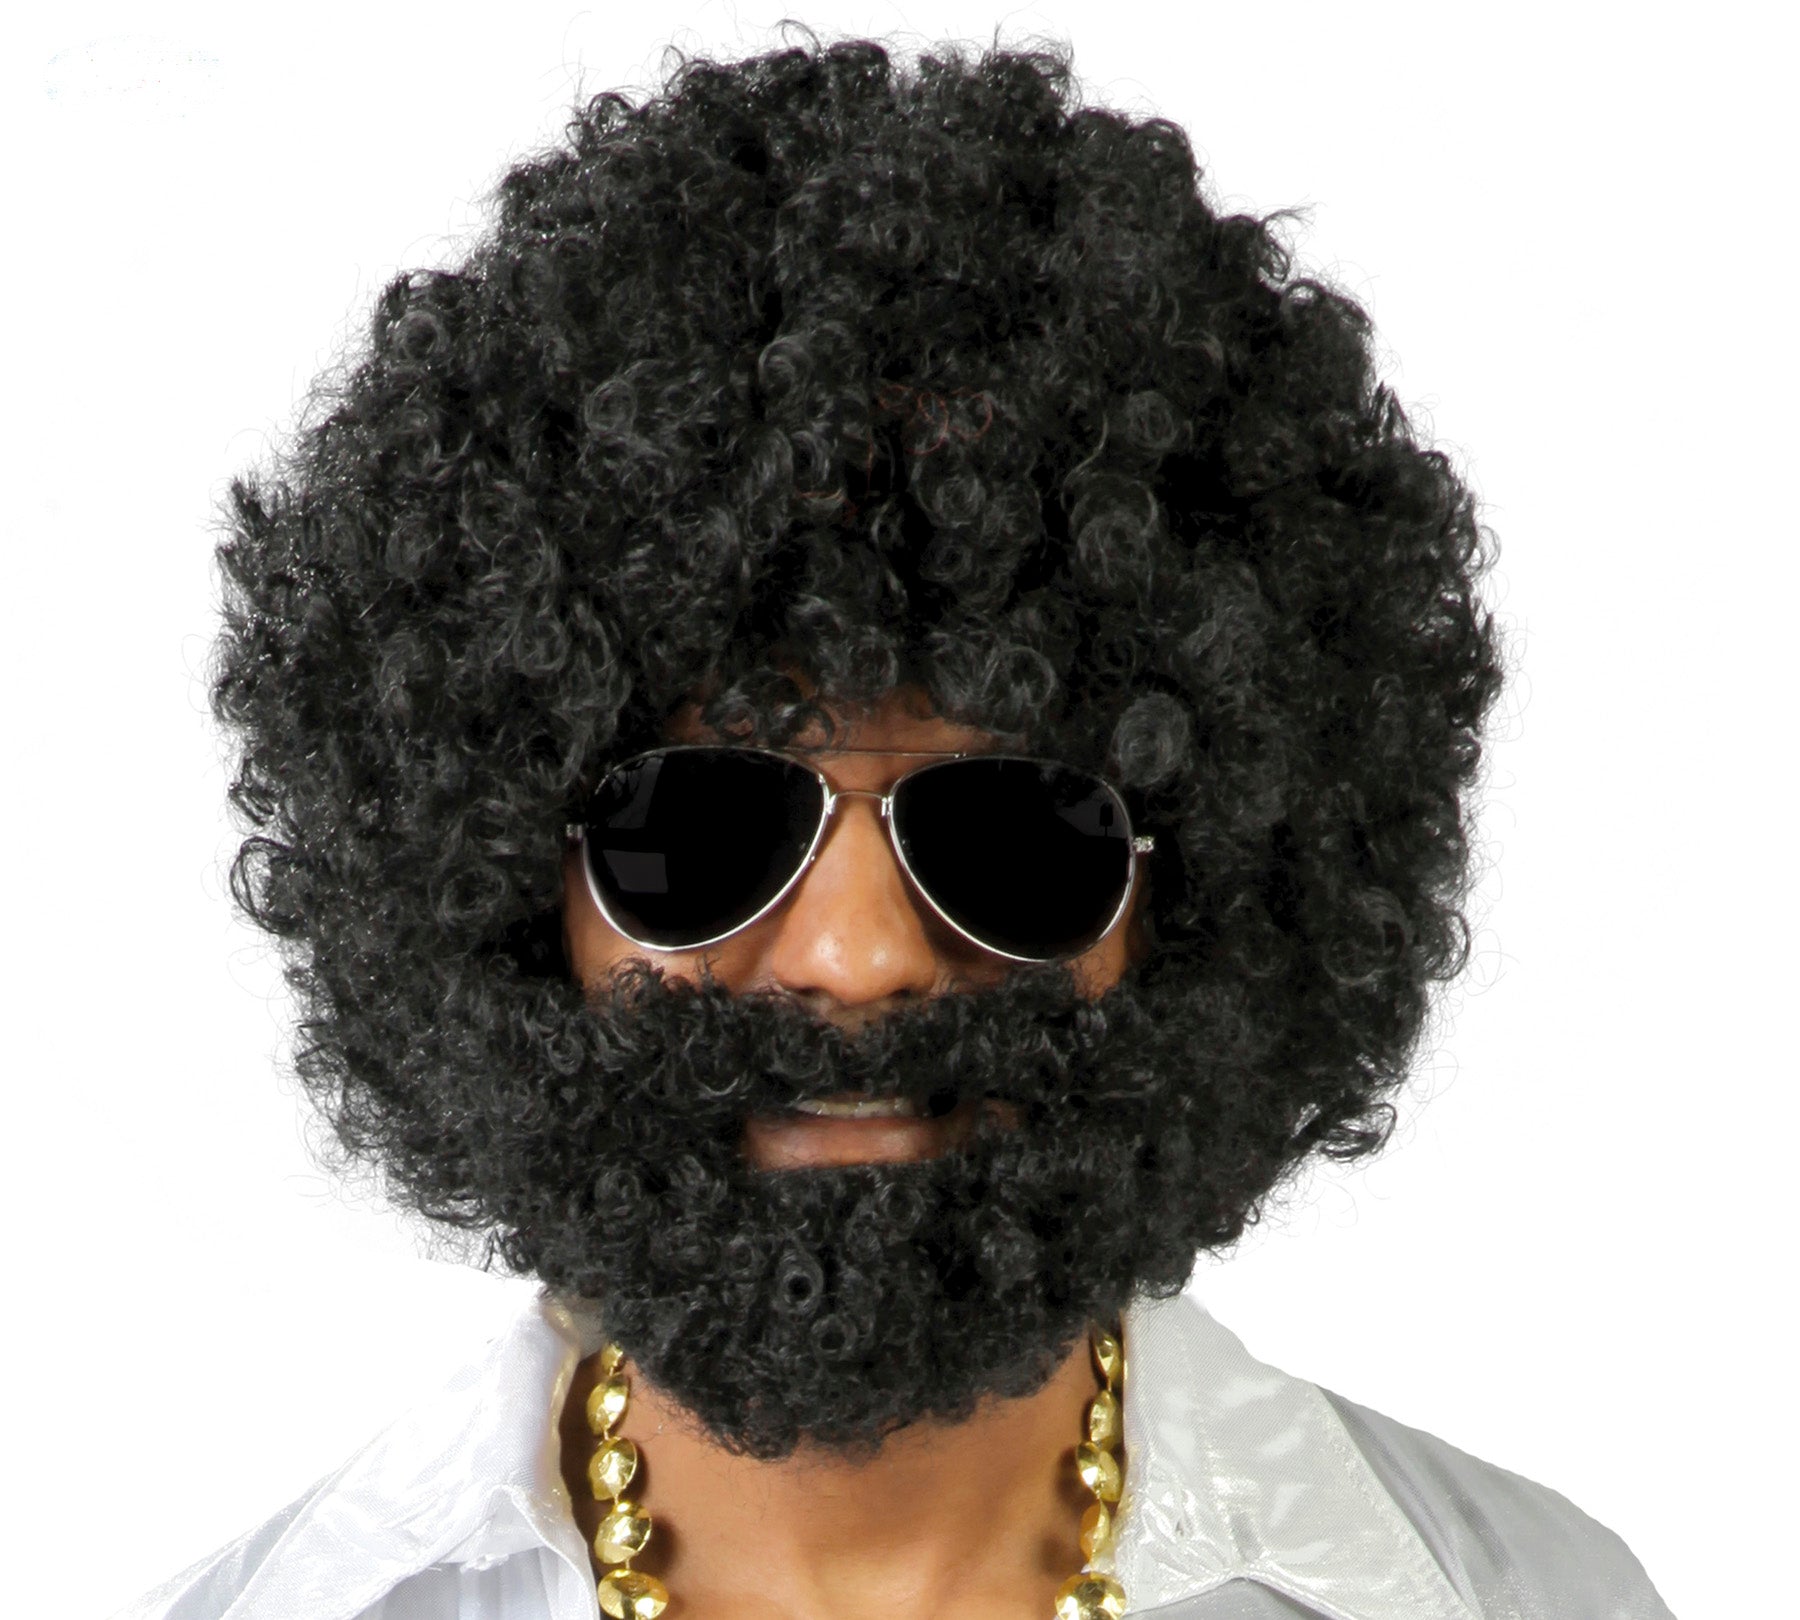 Black Curly Afro Wig And Beard